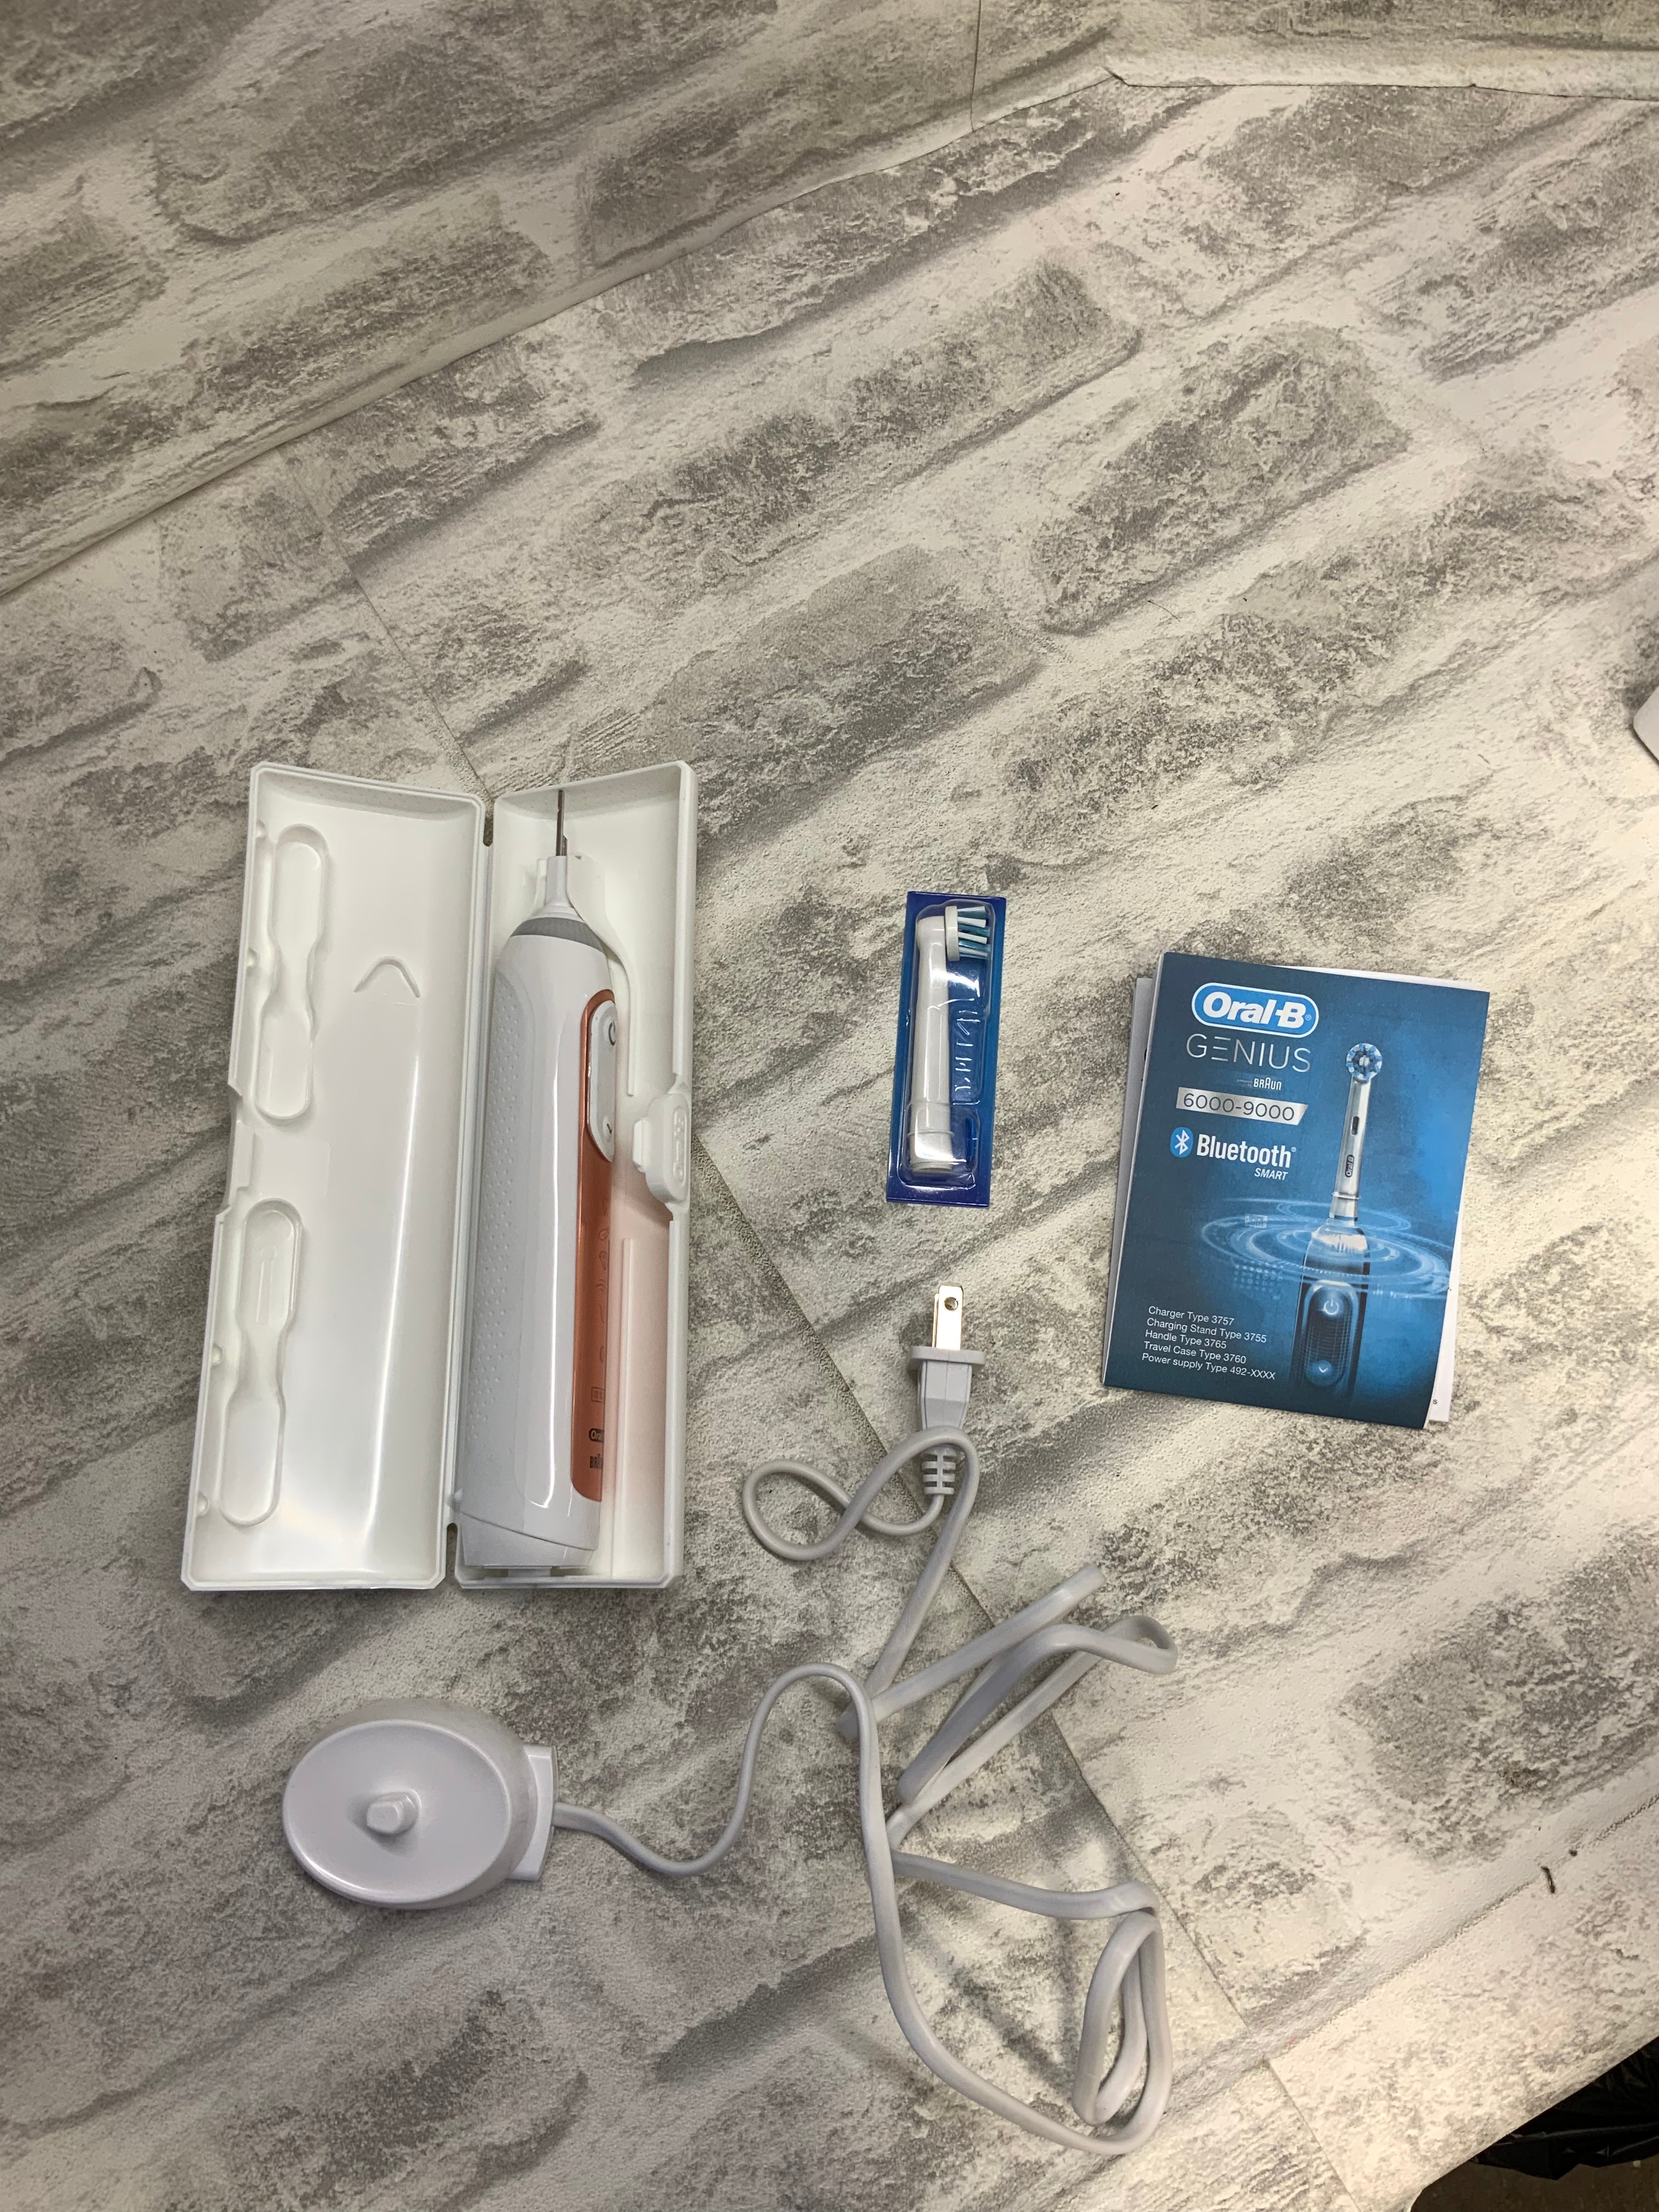 *FOR PARTS, DOES WORK* Oral-B Smart Limited Electric Toothbrush, Rose Gold (7610686505198)